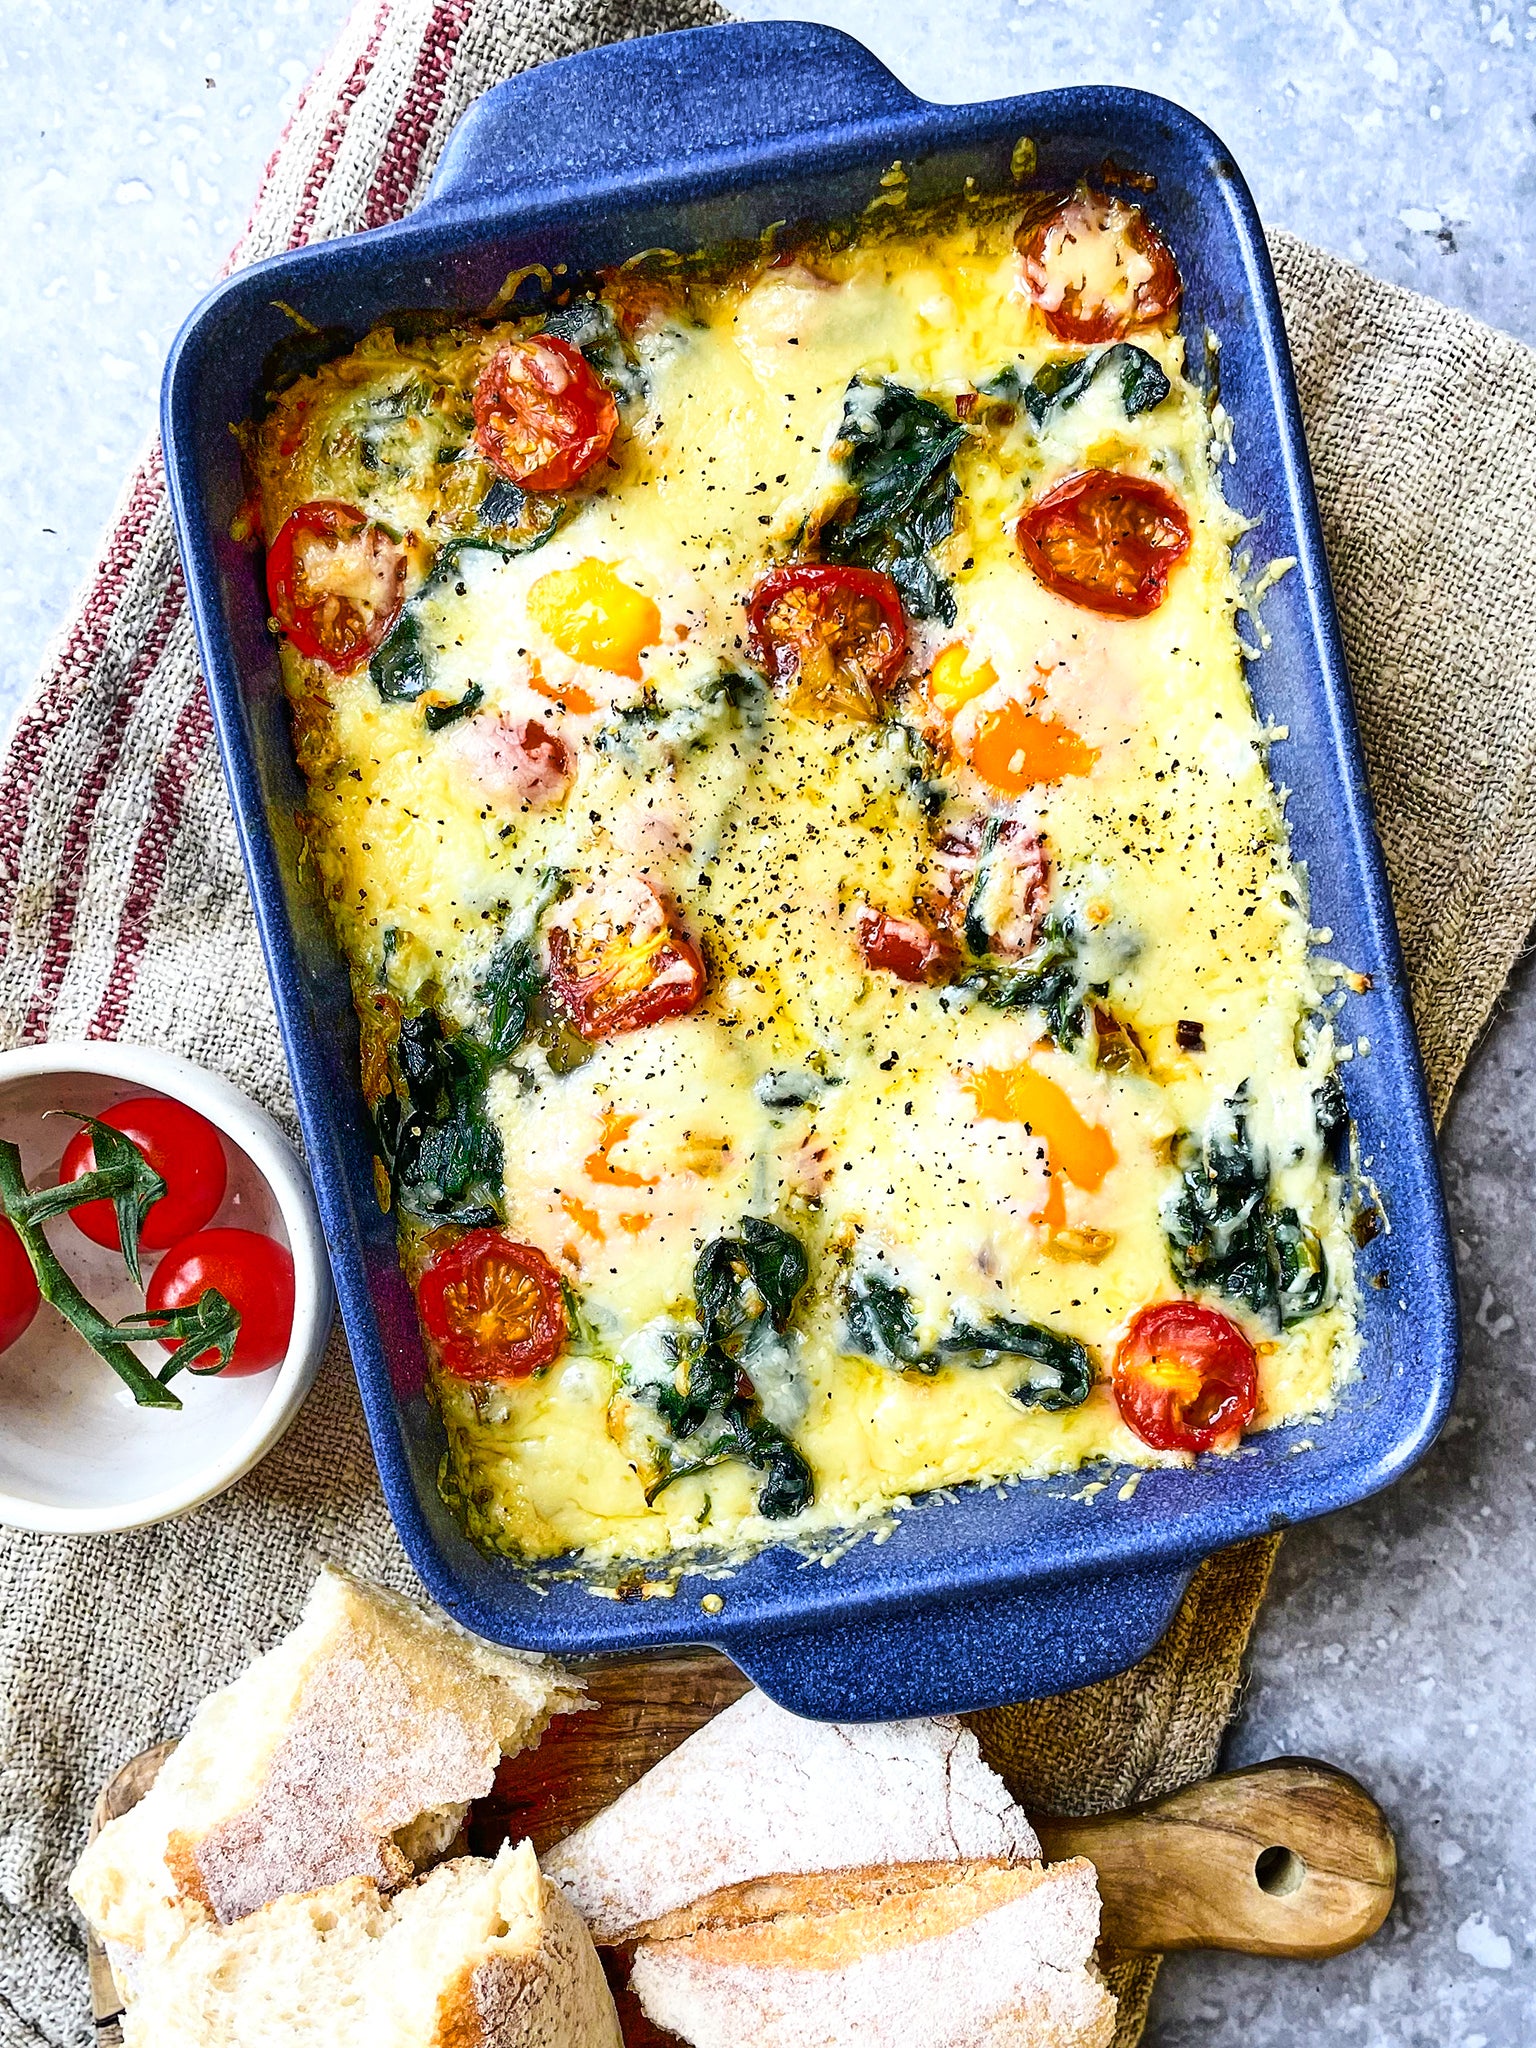 These cheesy baked eggs make a stunning centrepiece